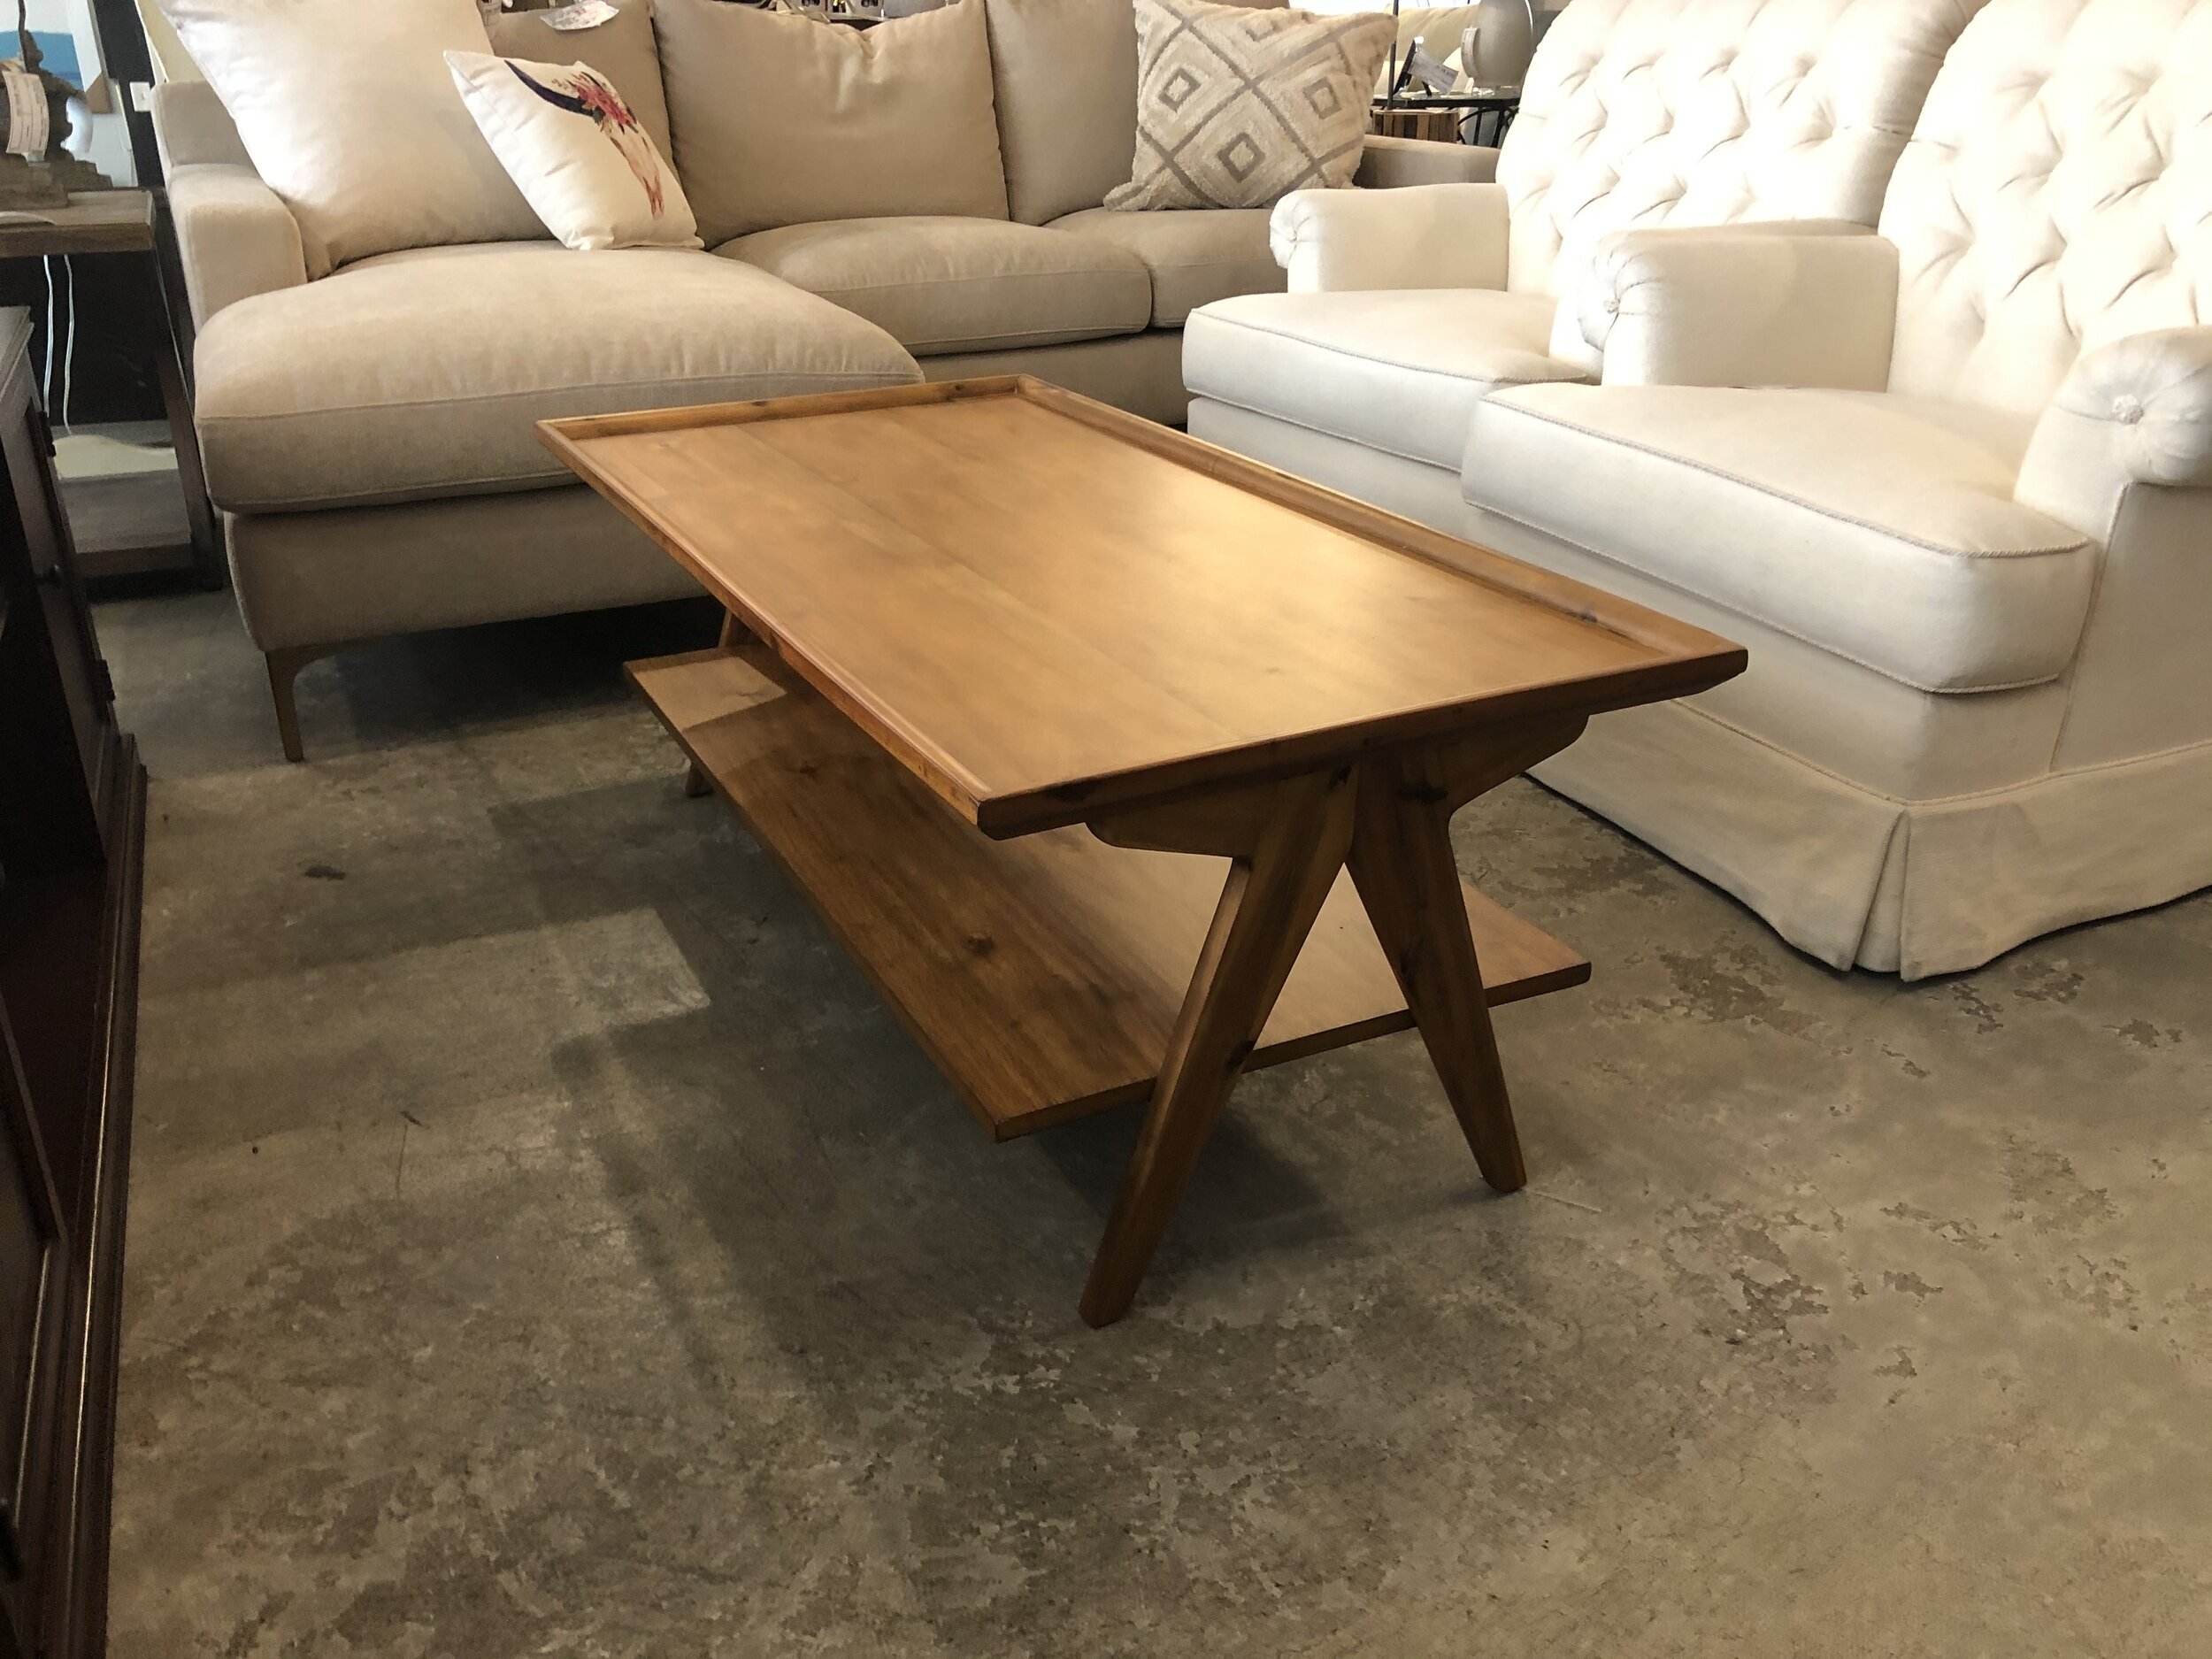 4. Coffee tables - no one is matching coffee tables with end tables anymore, so this is a great piece to look for.